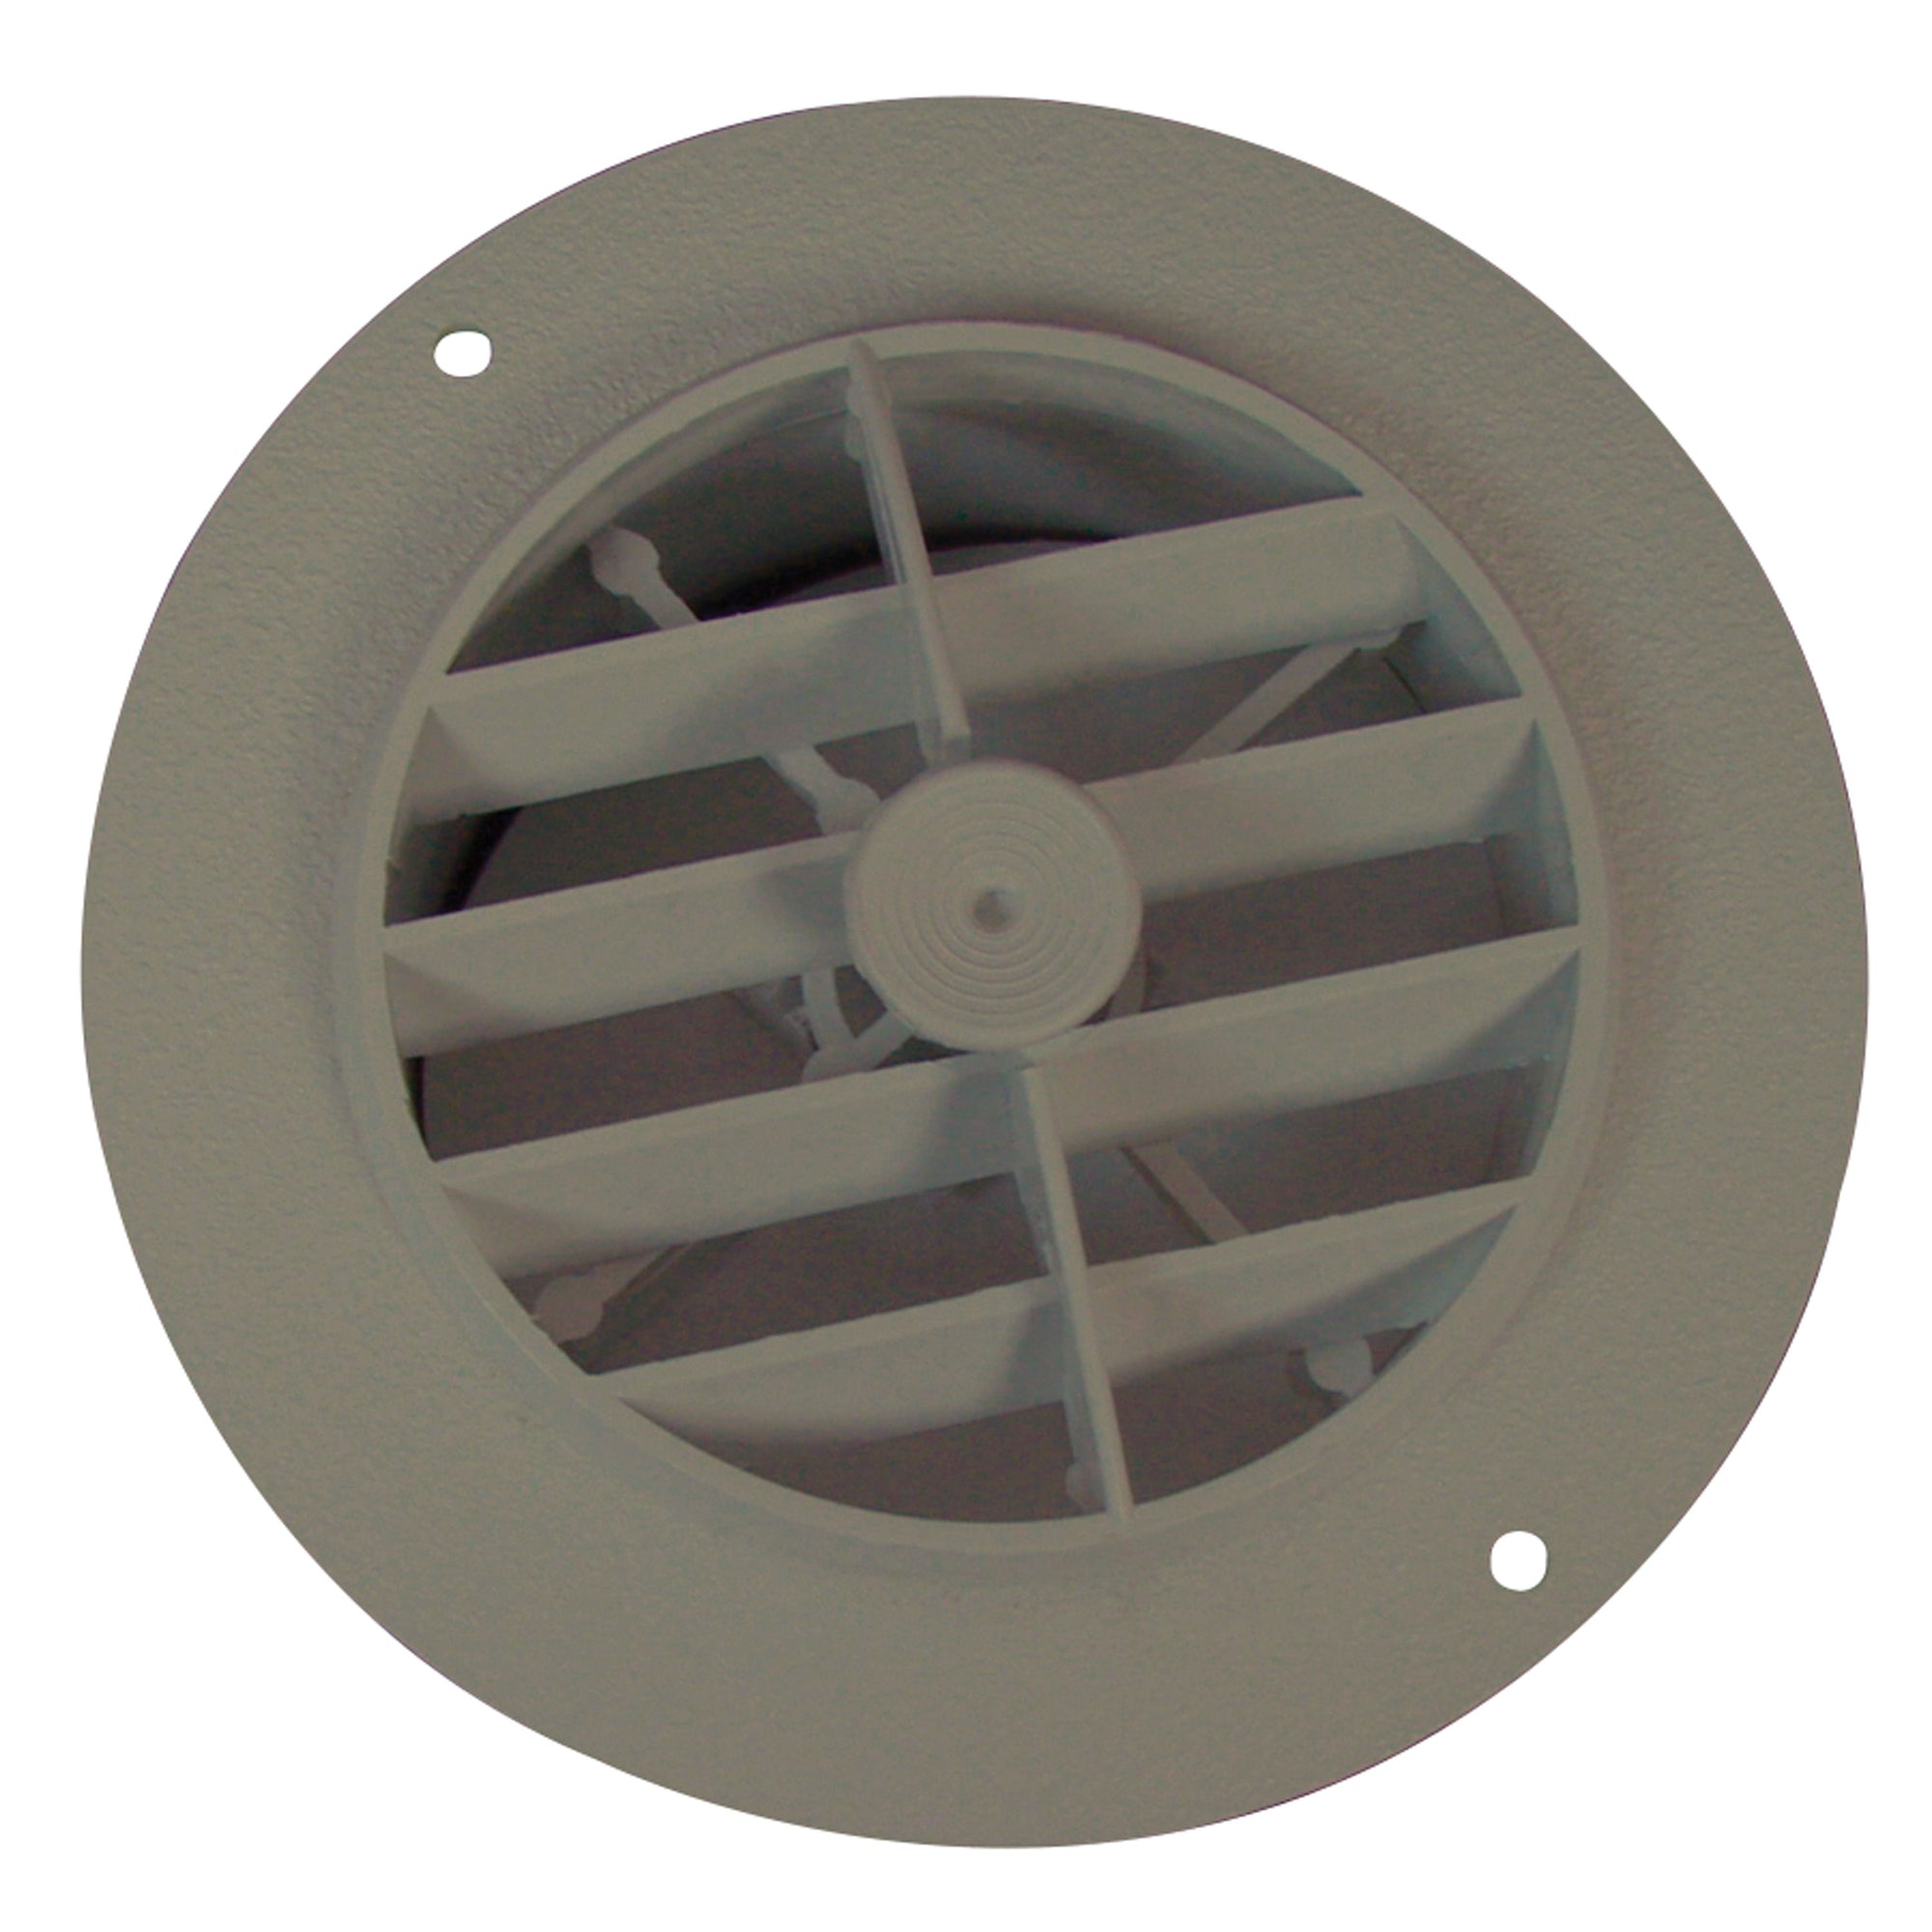 D&W 3840RDB Rotaire Heat Outlet Vent with Damper - 4", Dura-Beige